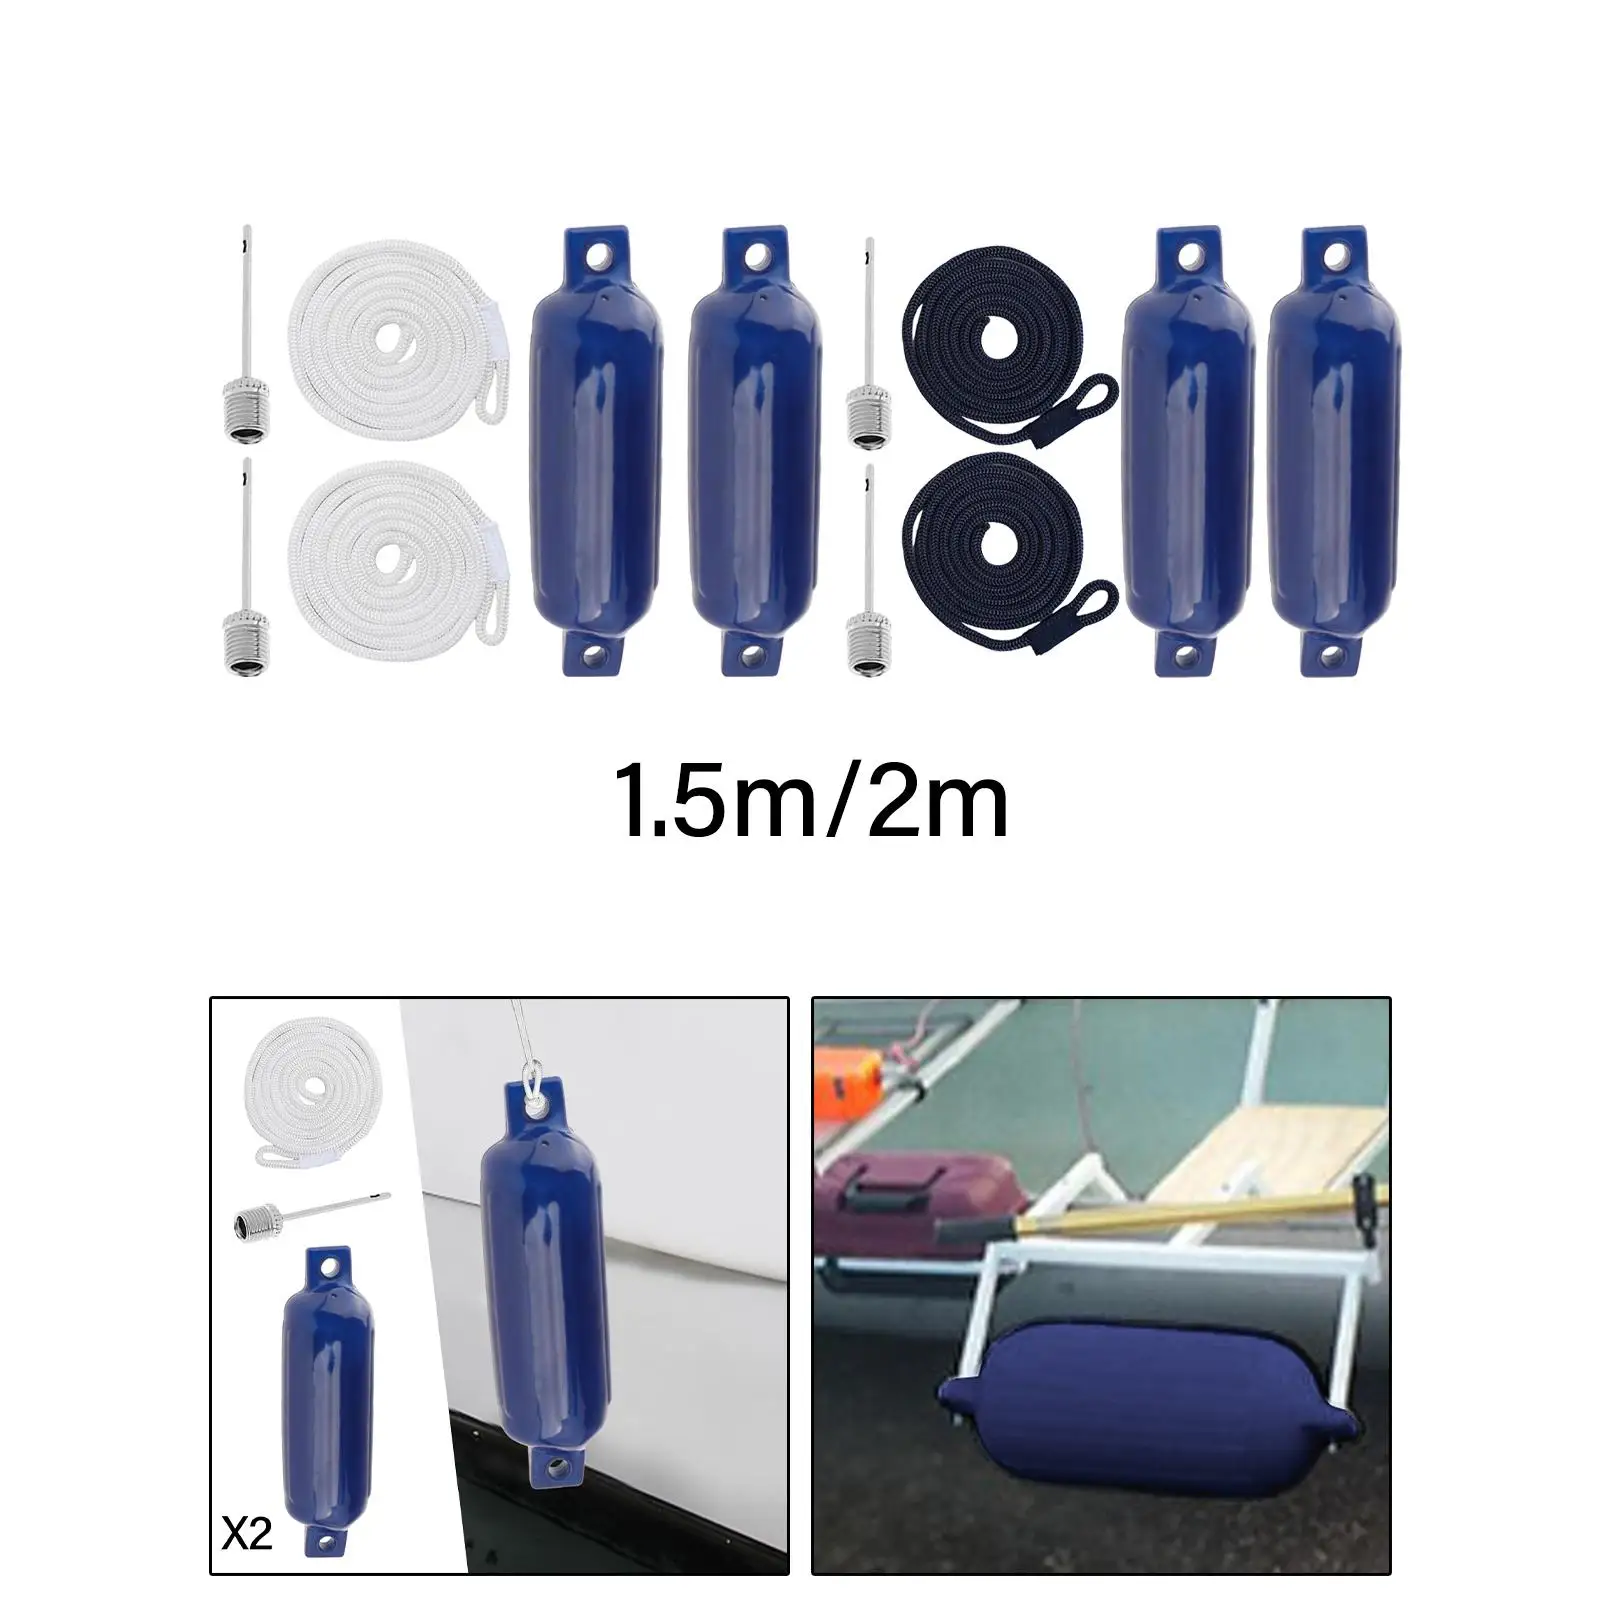 Boat,Boats Bumpers,Inflatable Marine Boat Bumper Anti Collision Protector for Docking